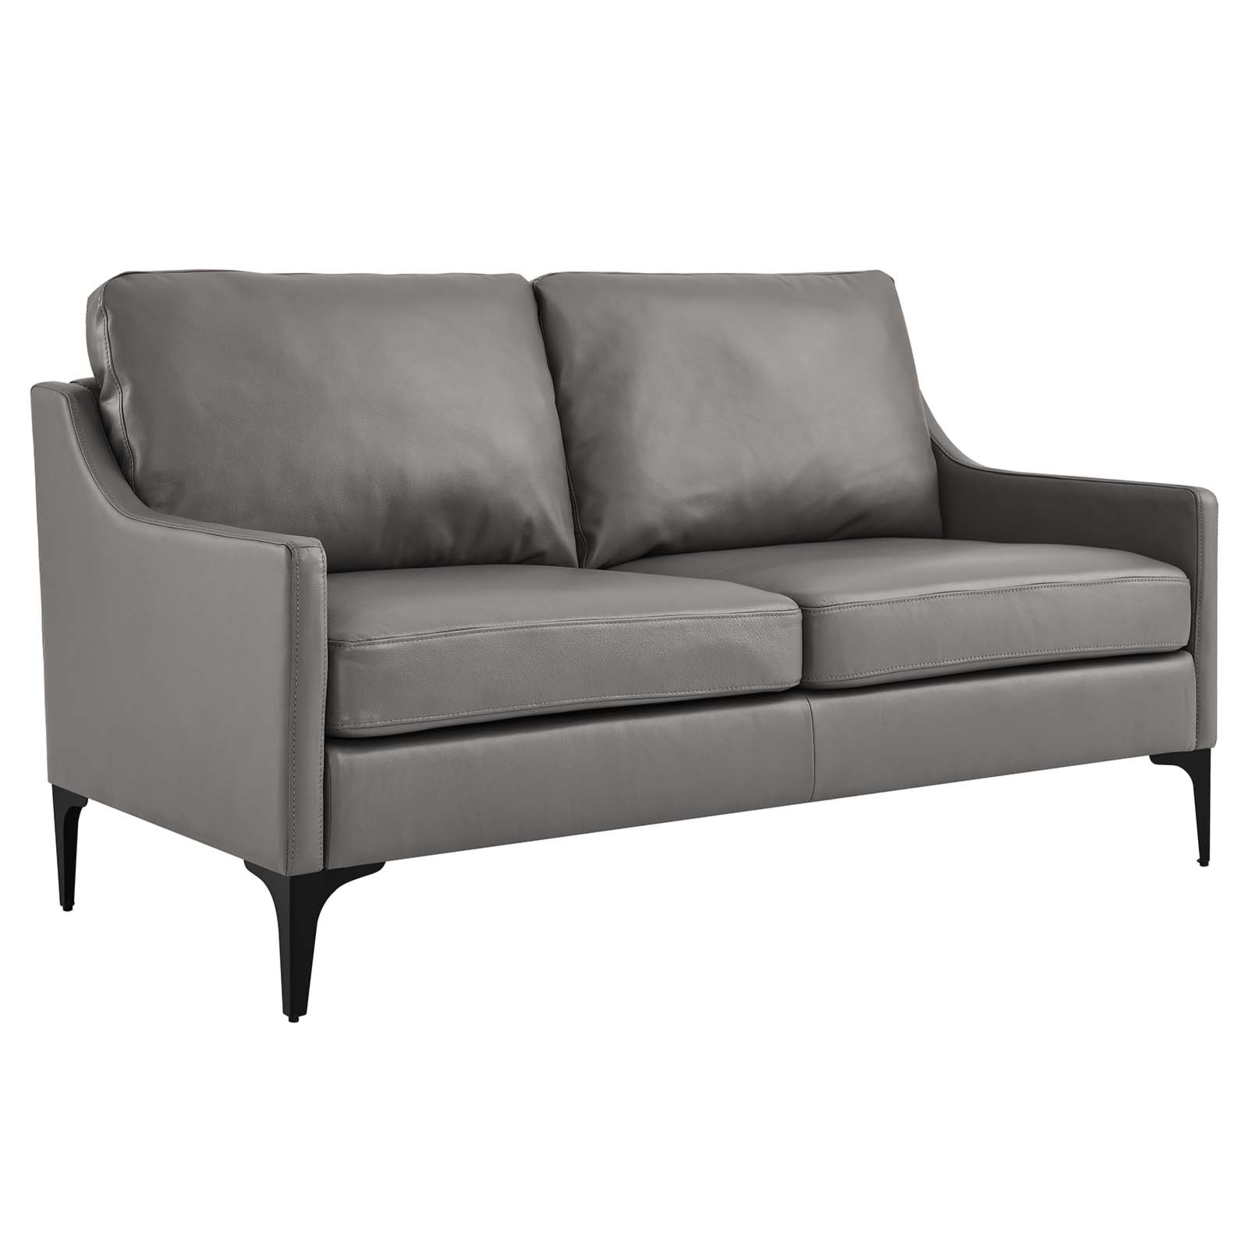 Corland Leather Loveseat, Gray